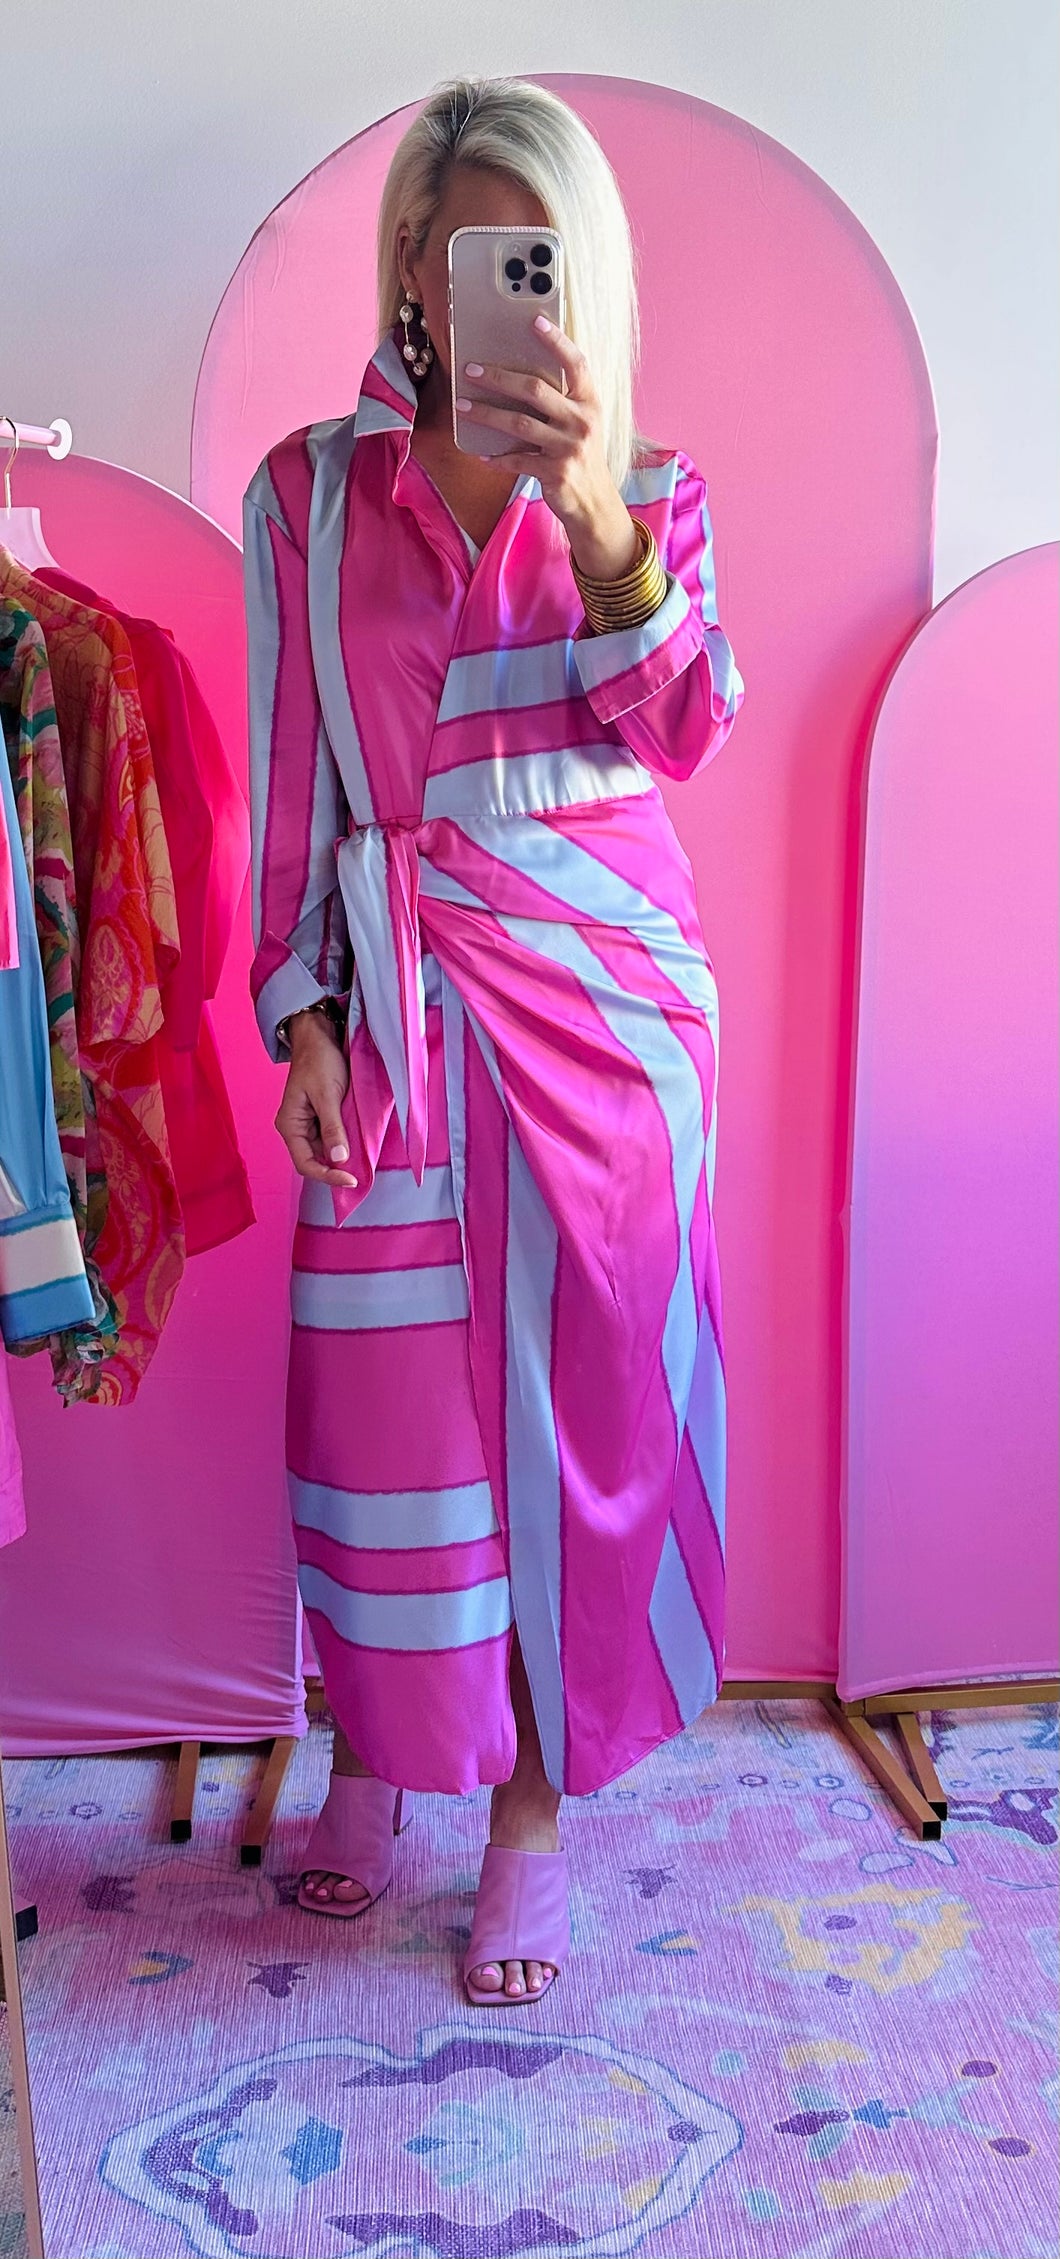 The Wrap Dress in Pink Stripe Combo